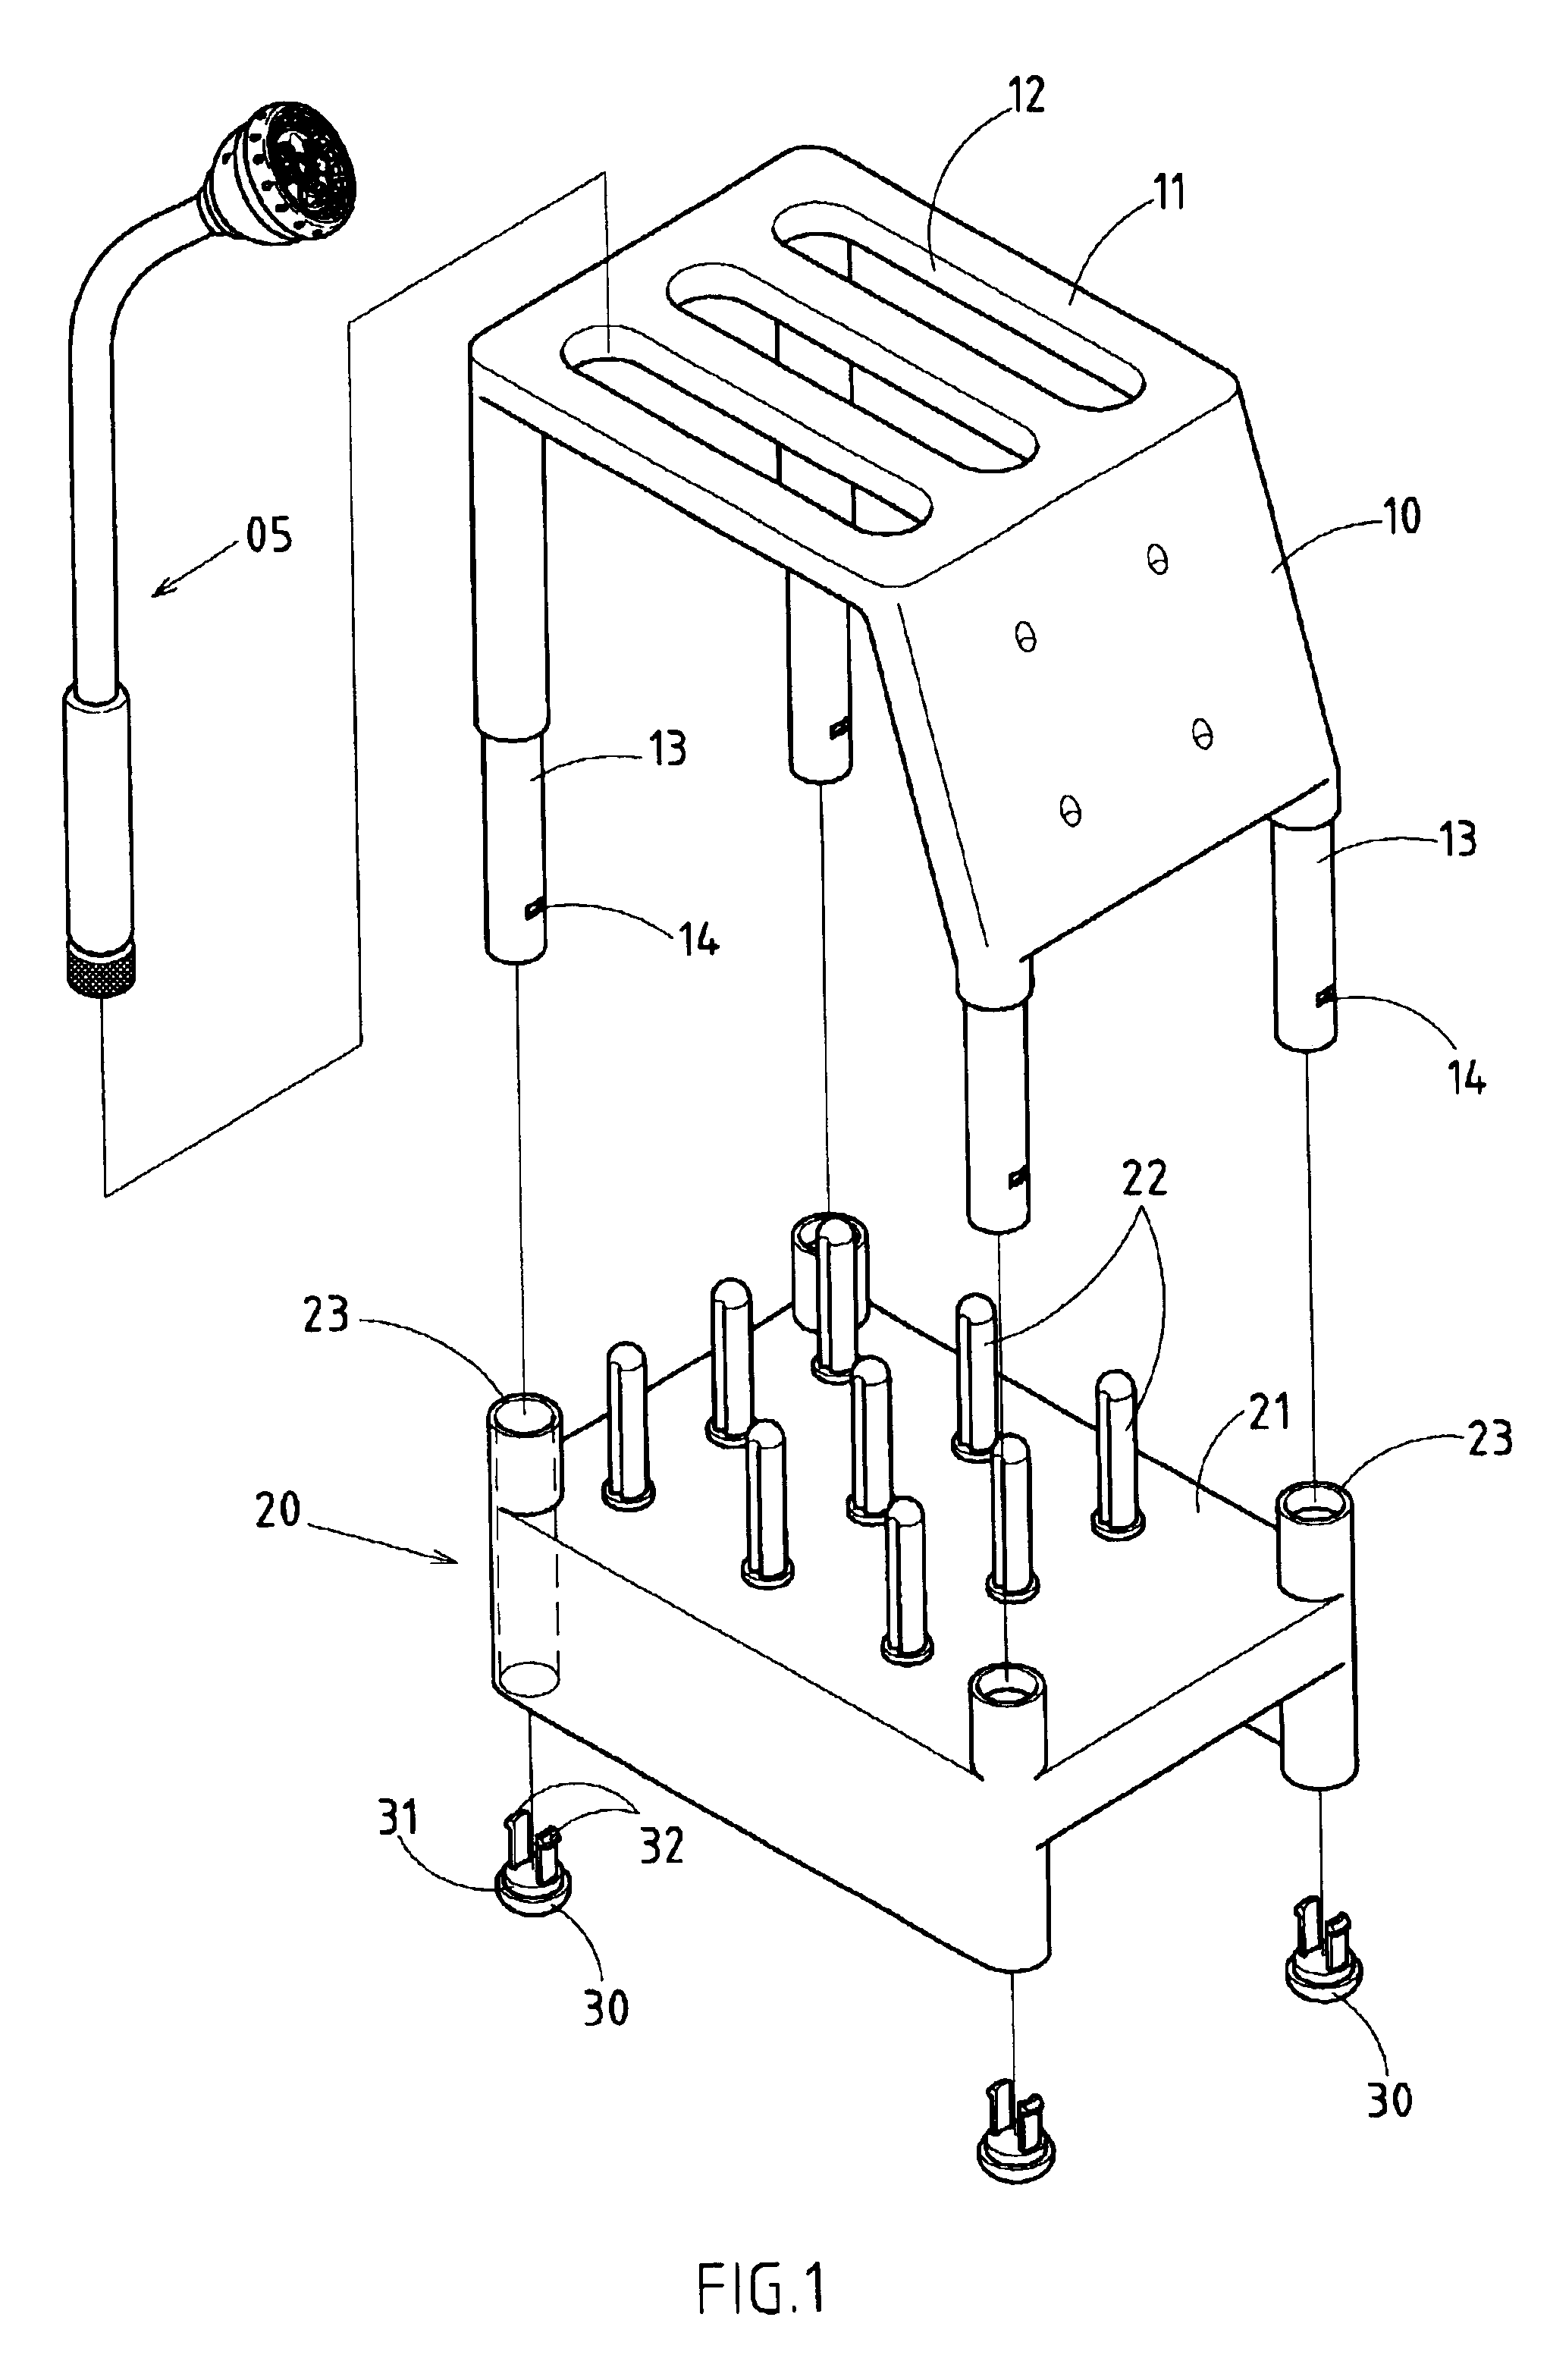 Foot structure of a rack for holding spray nozzles